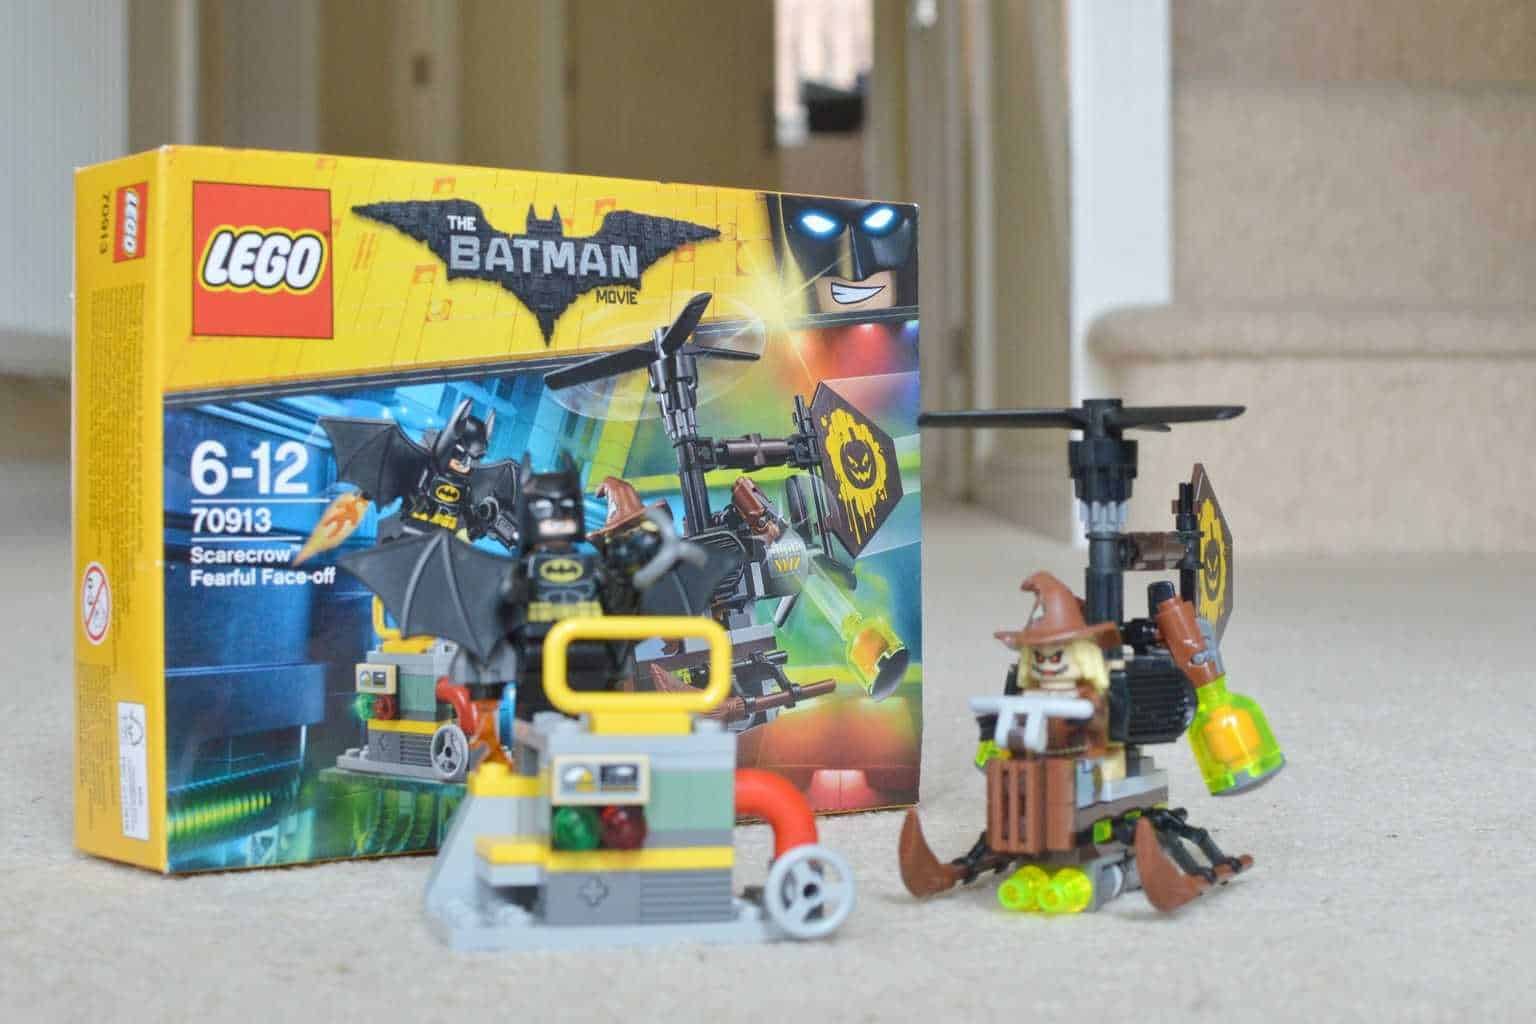 LEGO Batman 70913 Scarecrow Fearful Face-off {Review}